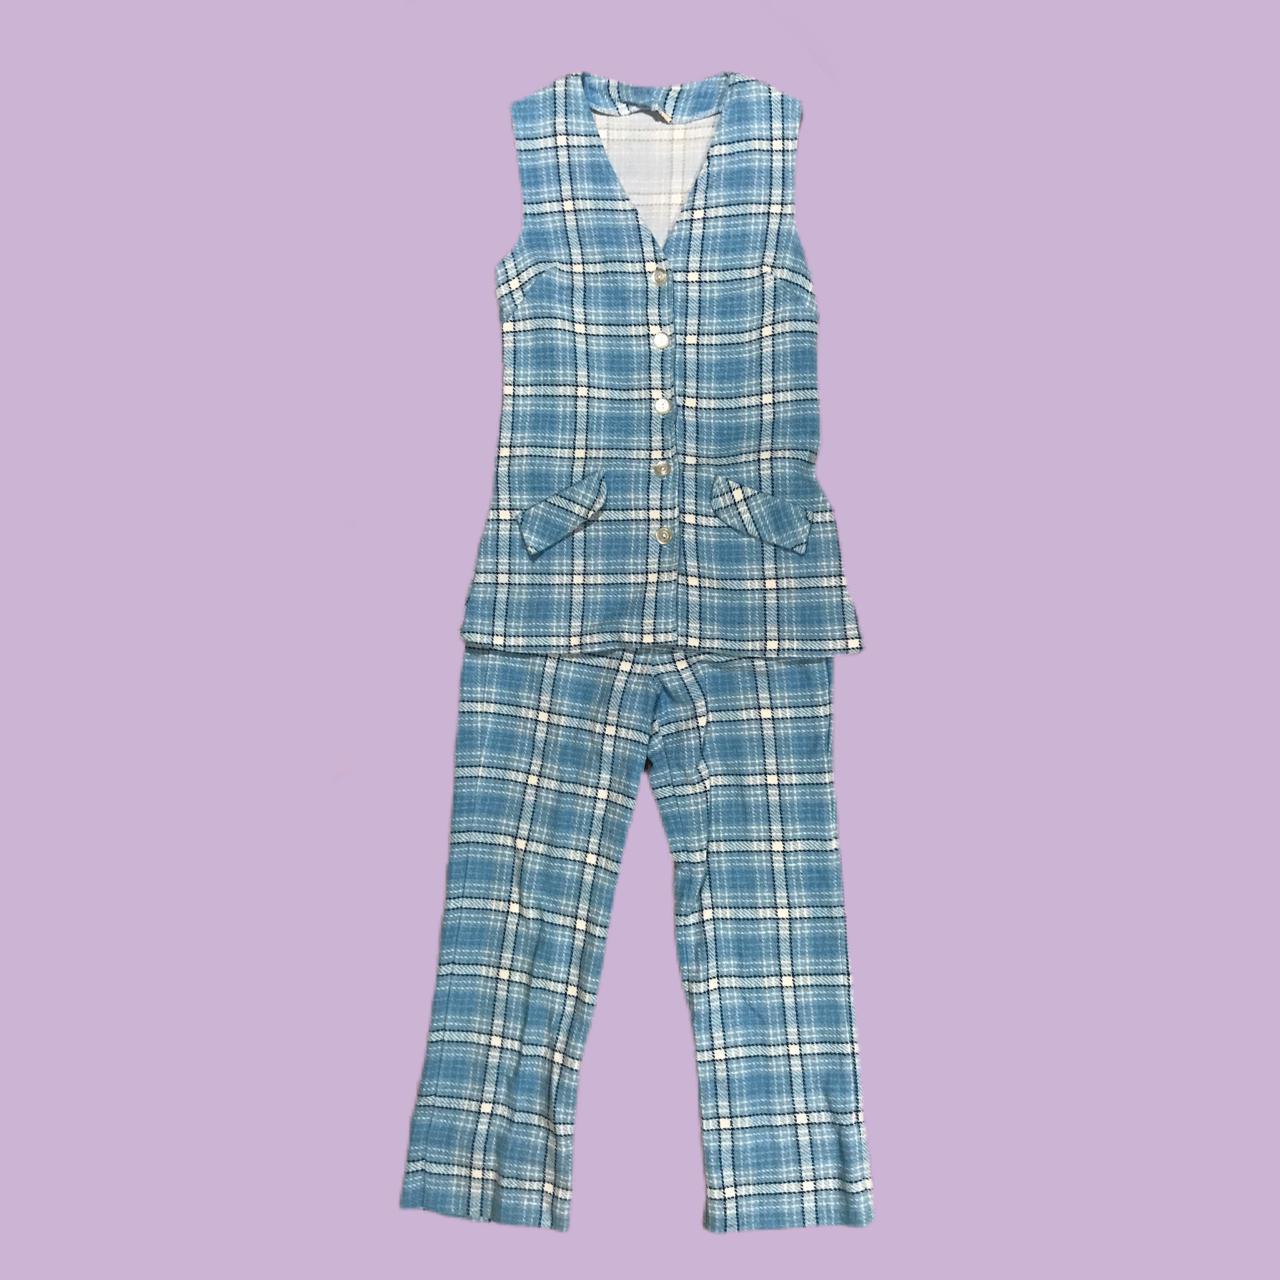 Product Image 1 - Vintage blue and white plaid